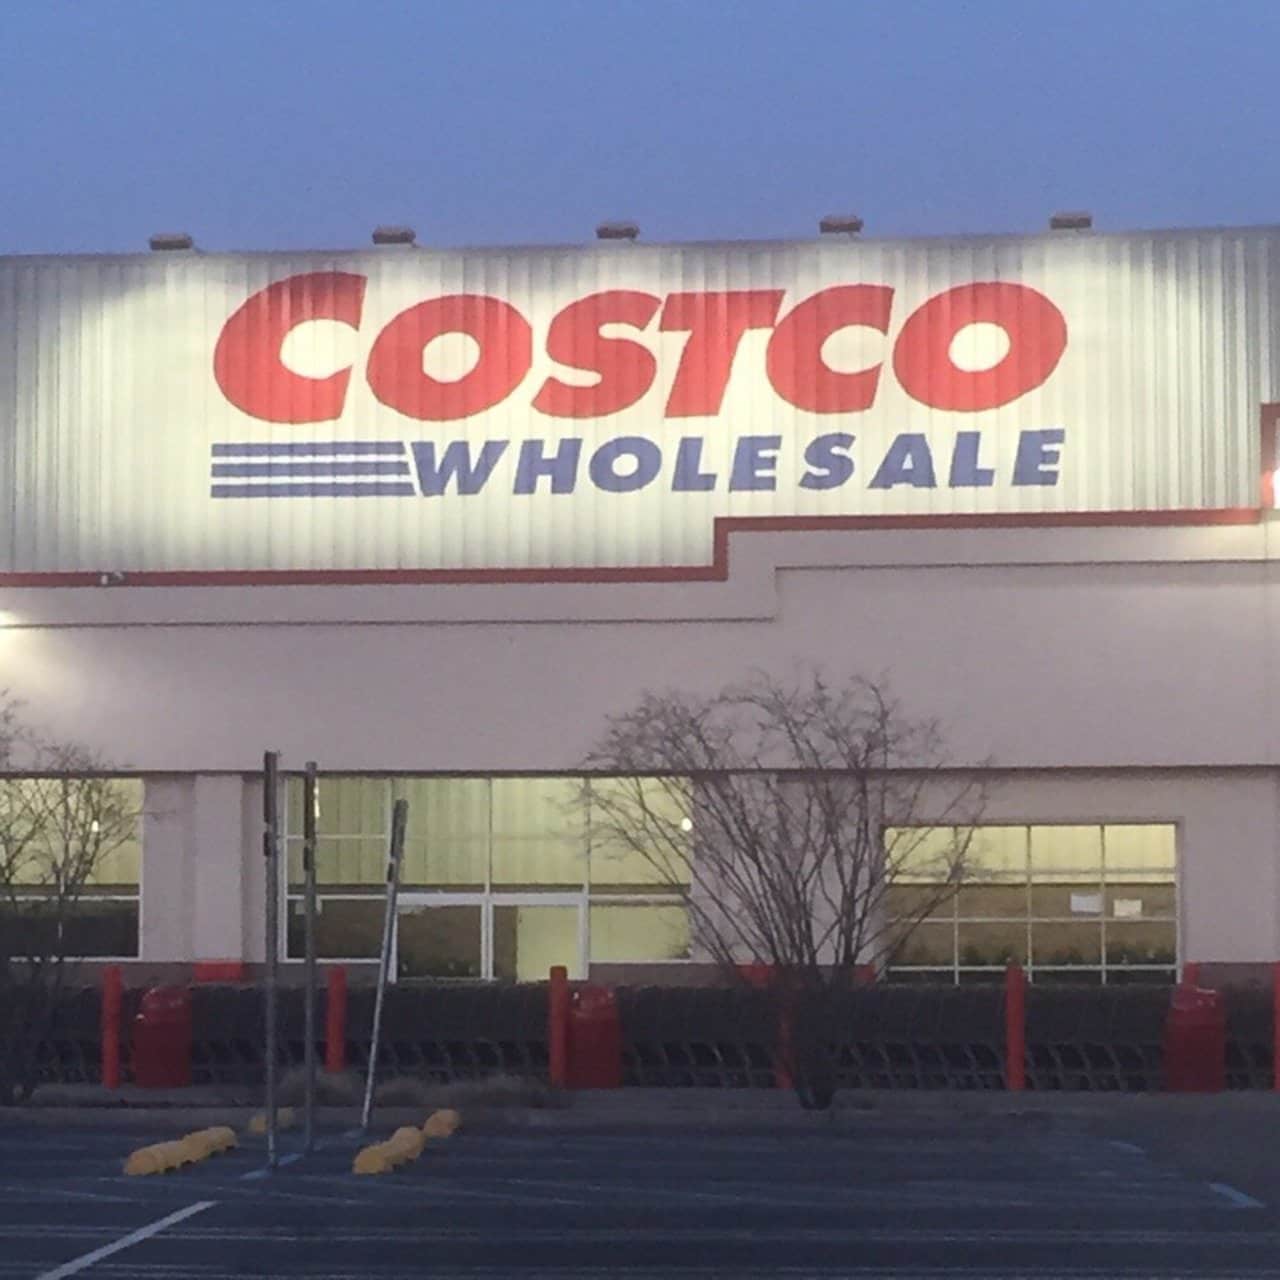 A man was run over by a minivan on New Years Eve at the New Rochelle Costco.